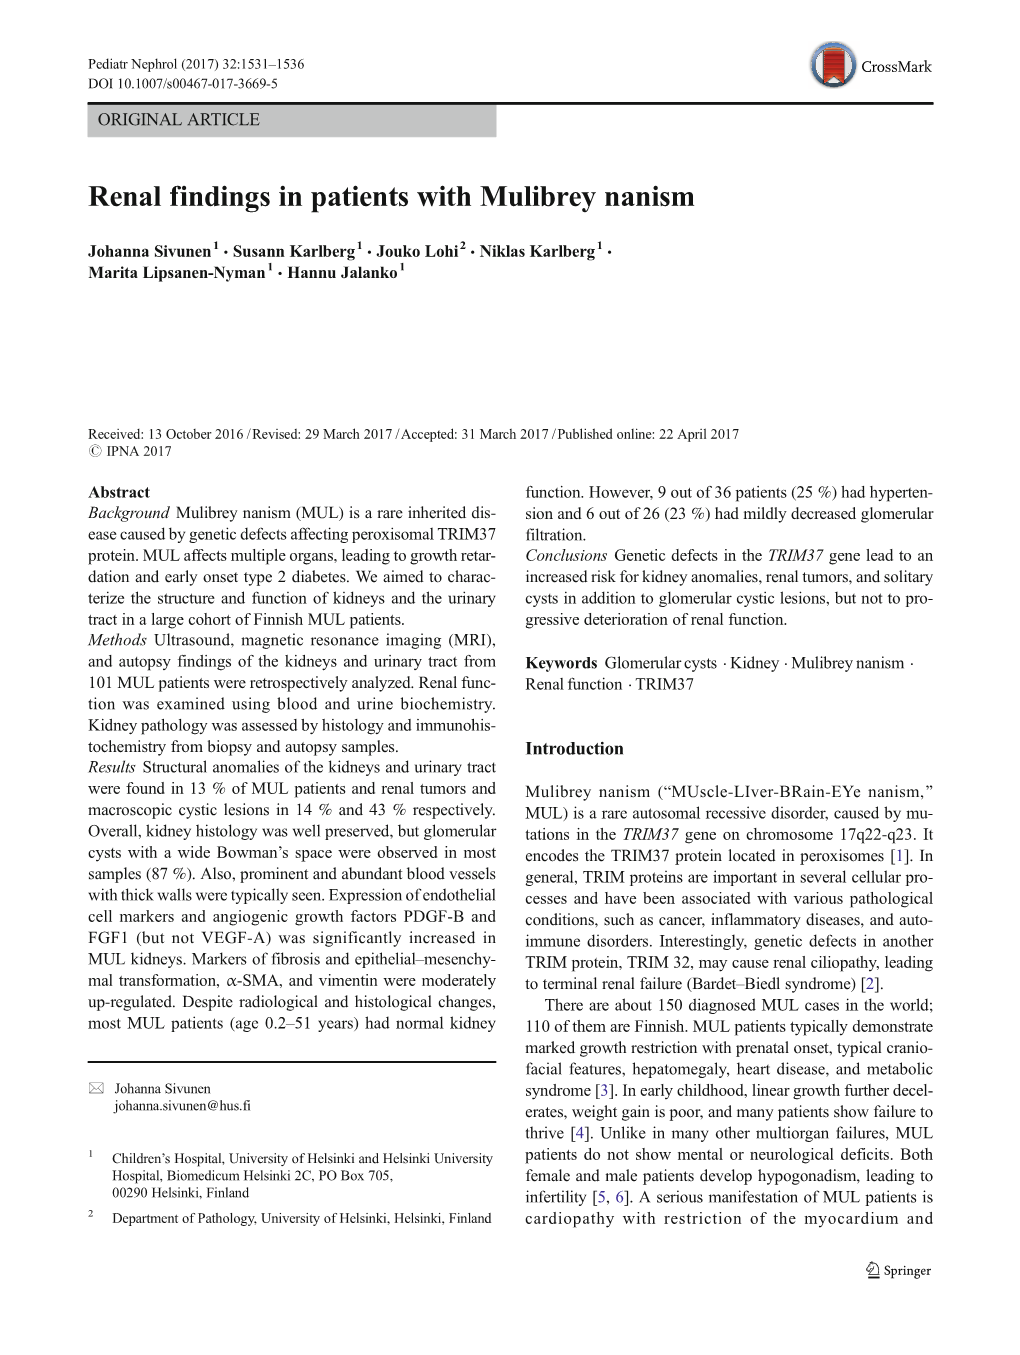 Renal Findings in Patients with Mulibrey Nanism